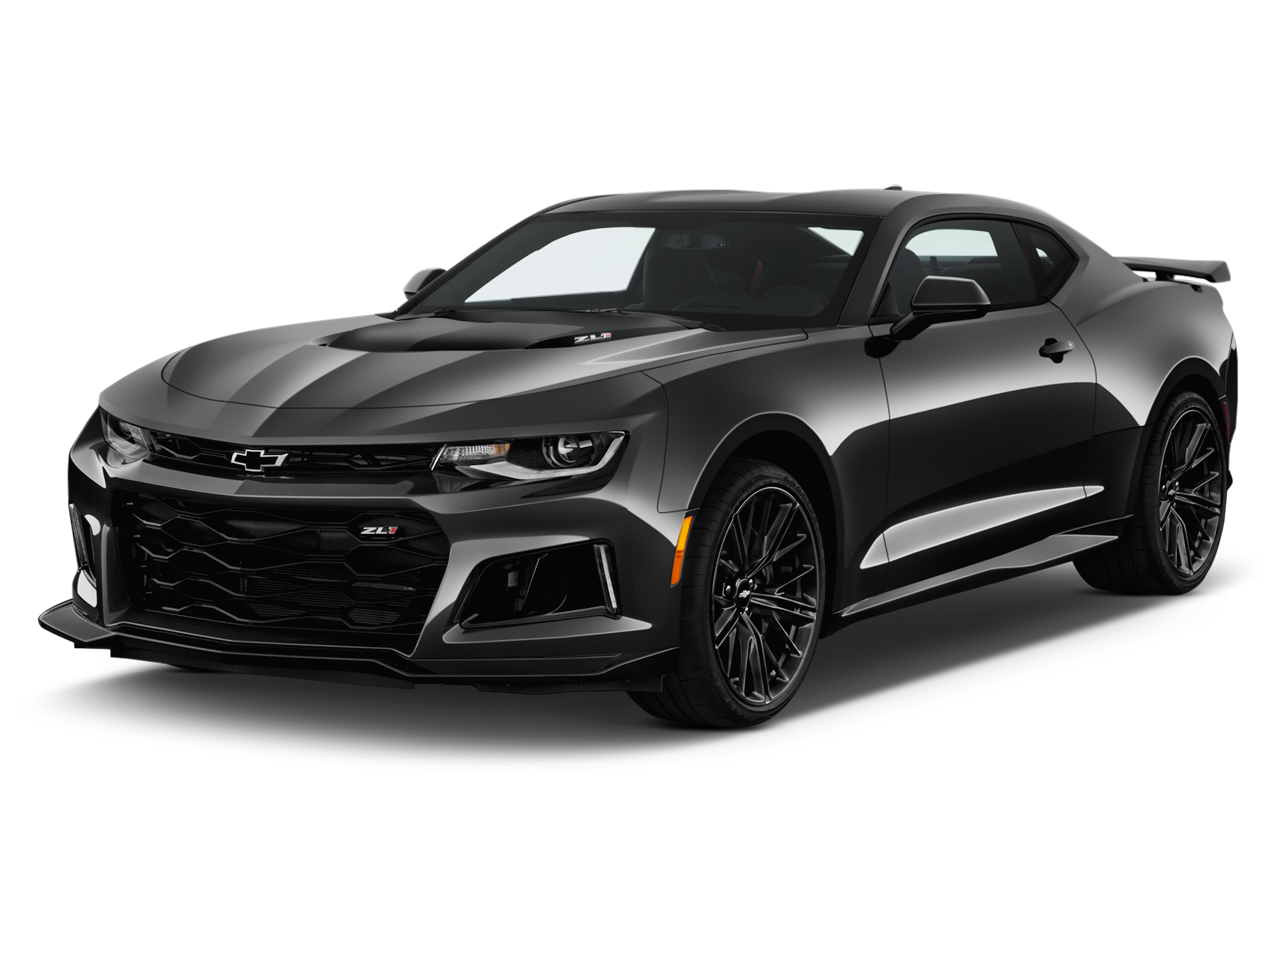 2021 Chevrolet Camaro (Chevy) Review, Ratings, Specs, Prices, and ...